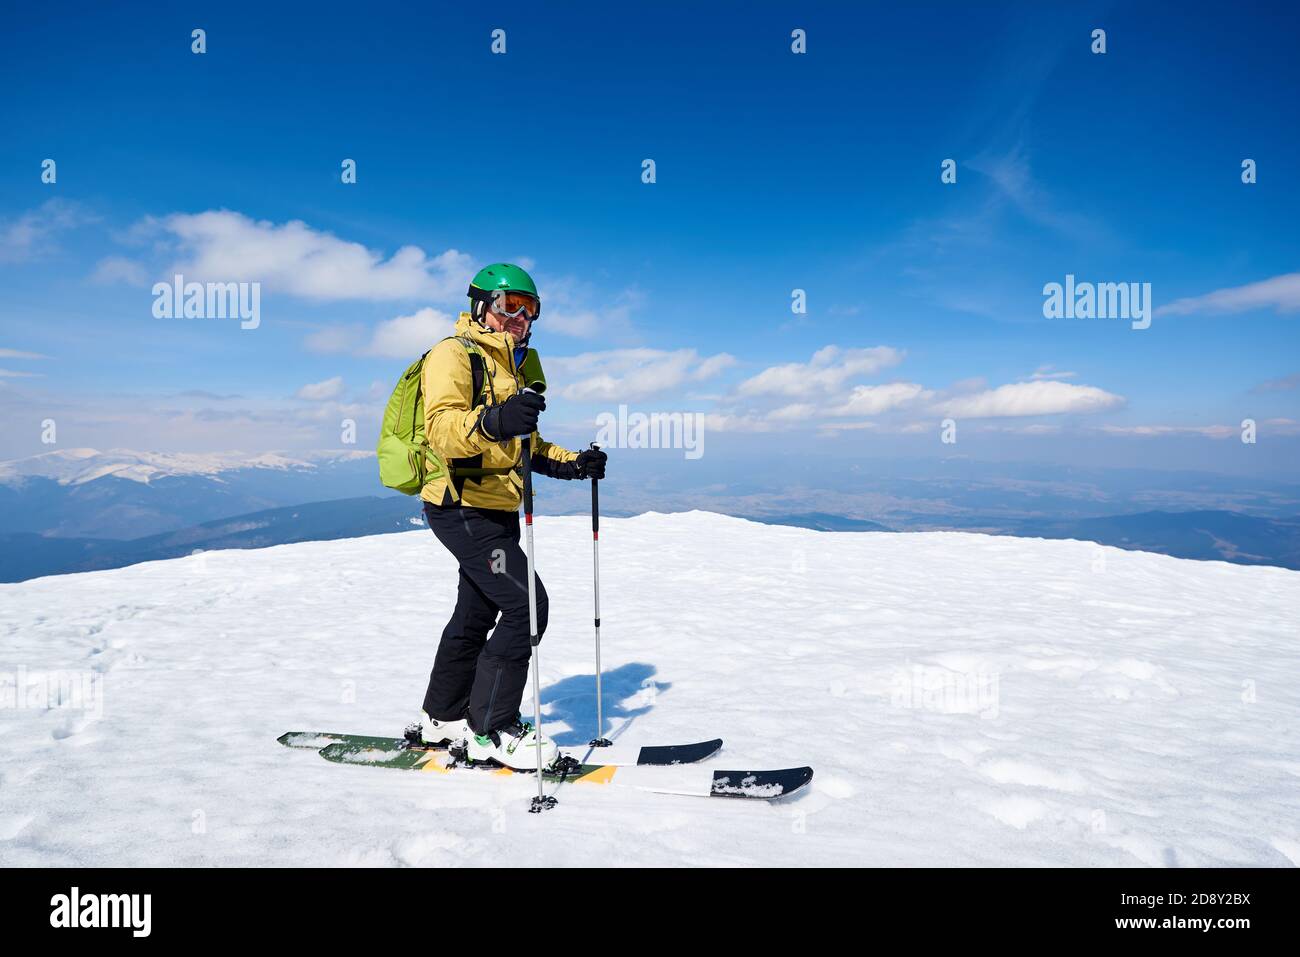 Sportsman skier with backpack in helmet and goggles standing on skis on snowy mountain summit on copy space background of bright blue sky and highland landscape. Professional skiing equipment concept. Stock Photo